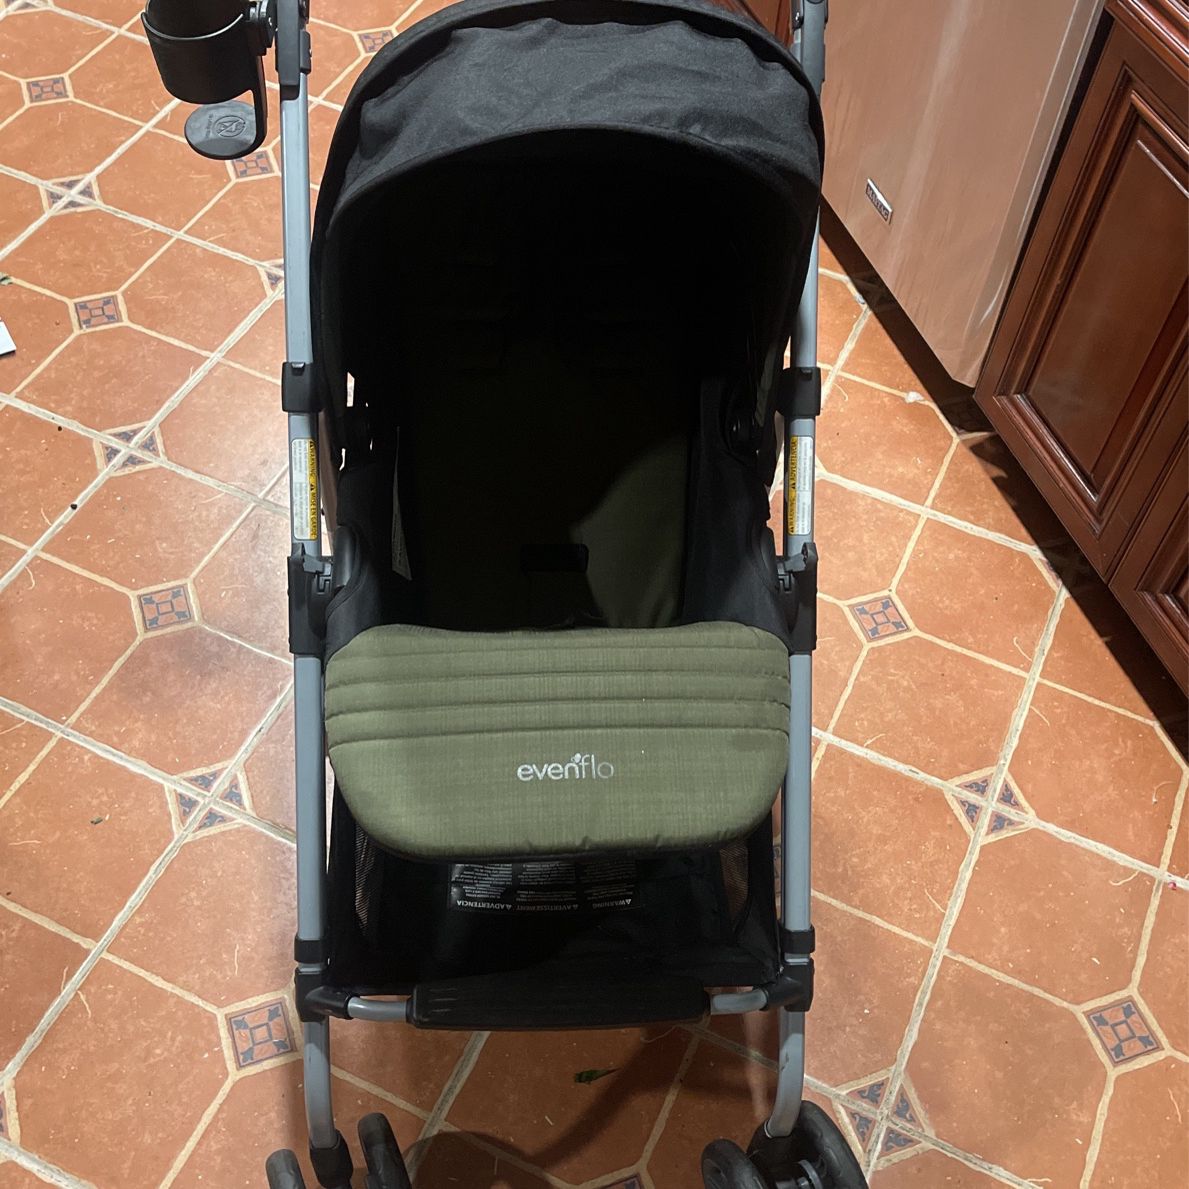 Even Flo Stroller Like New (Missing Carriage Part)